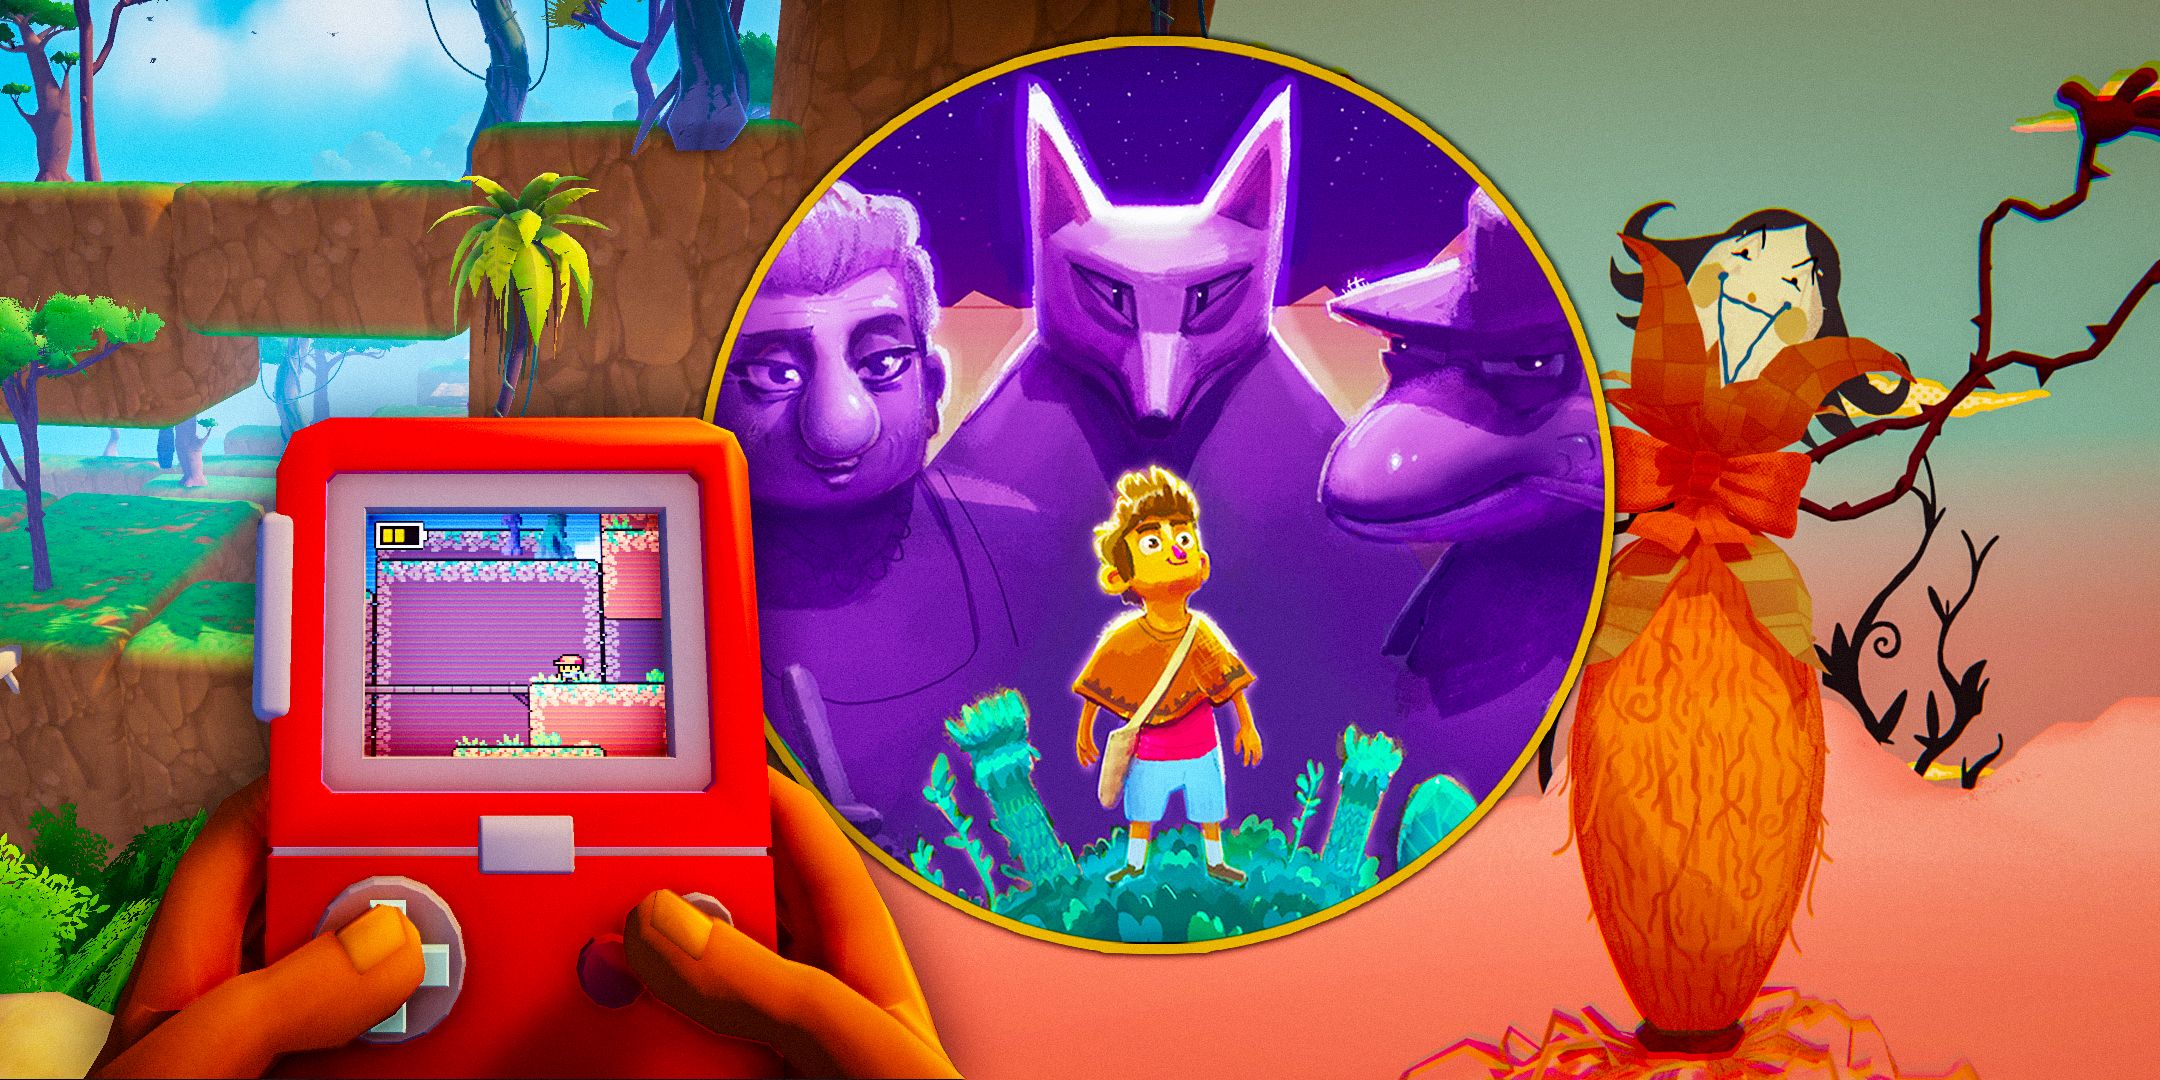 From left to right, hands holding a red handheld game device, a young boy surrounded by purple statues, and an evil looking woman who appears to be made of hay with squiggling arms.